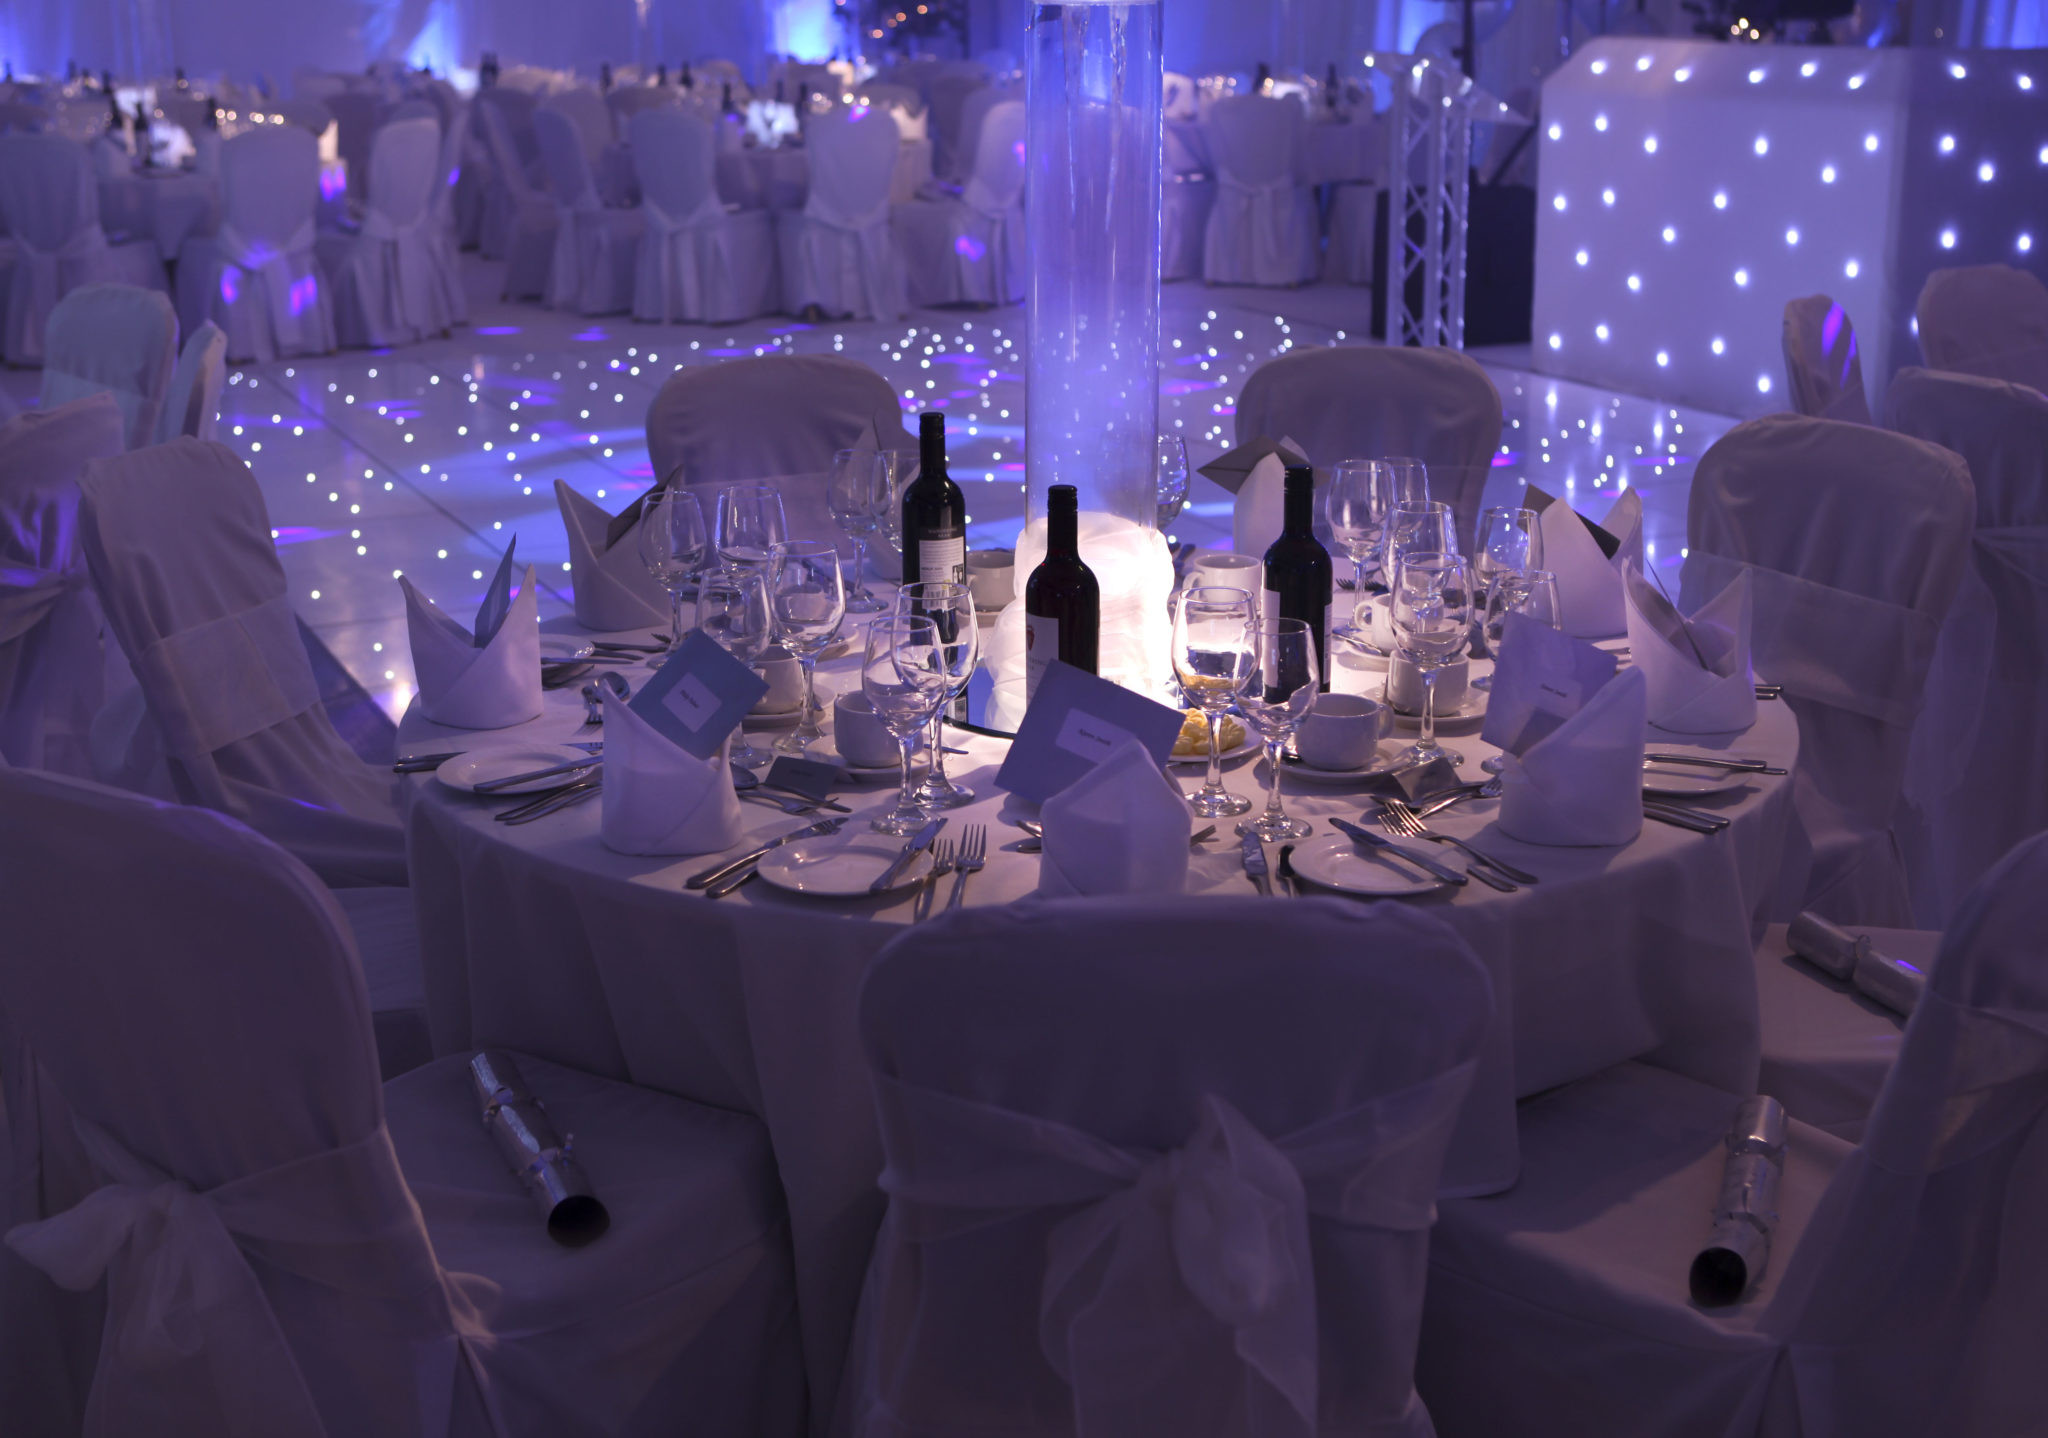 Christmas Party Ideas For Work
 Christmas Party Ideas for Work Accolade Corporate Events